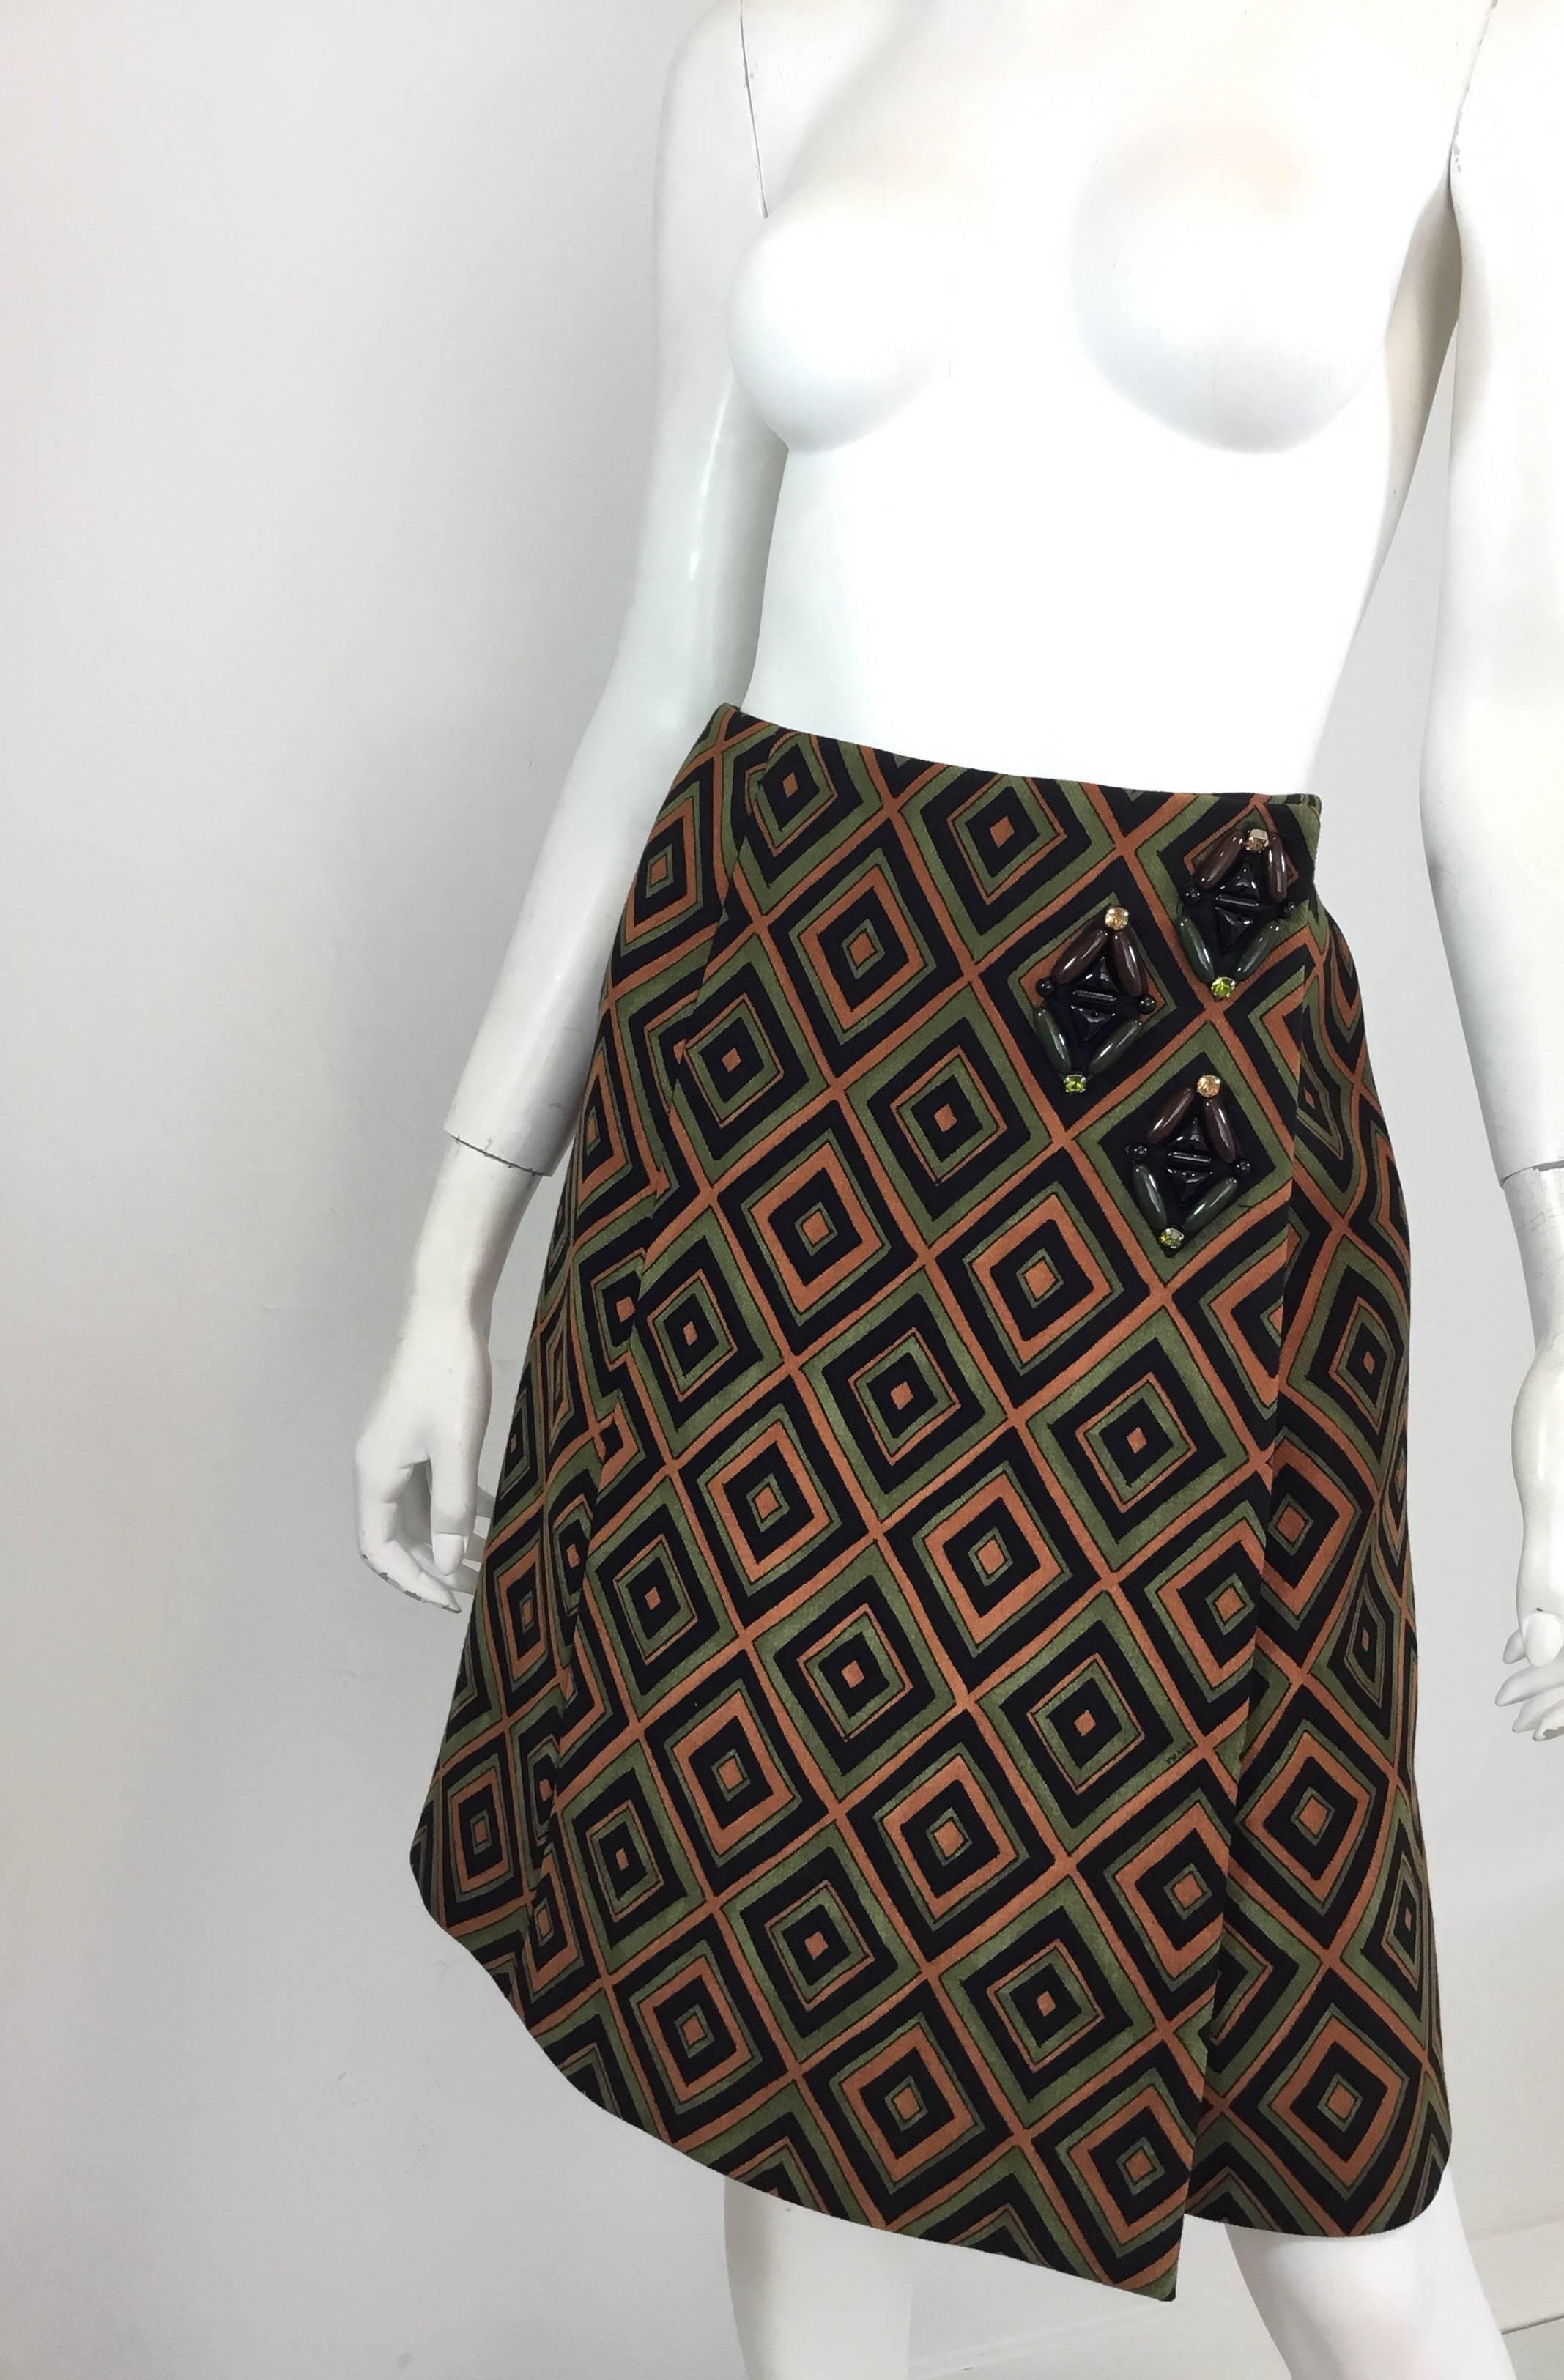 Prada skirt from the Fall 2012 RTW Collection inspired by the house’s Fall/Winter 1996 Collection — features an olive green, brown, and black diamond geometric print with bead and rhinestone embellishing at the left hip. Skirt has snap studs and